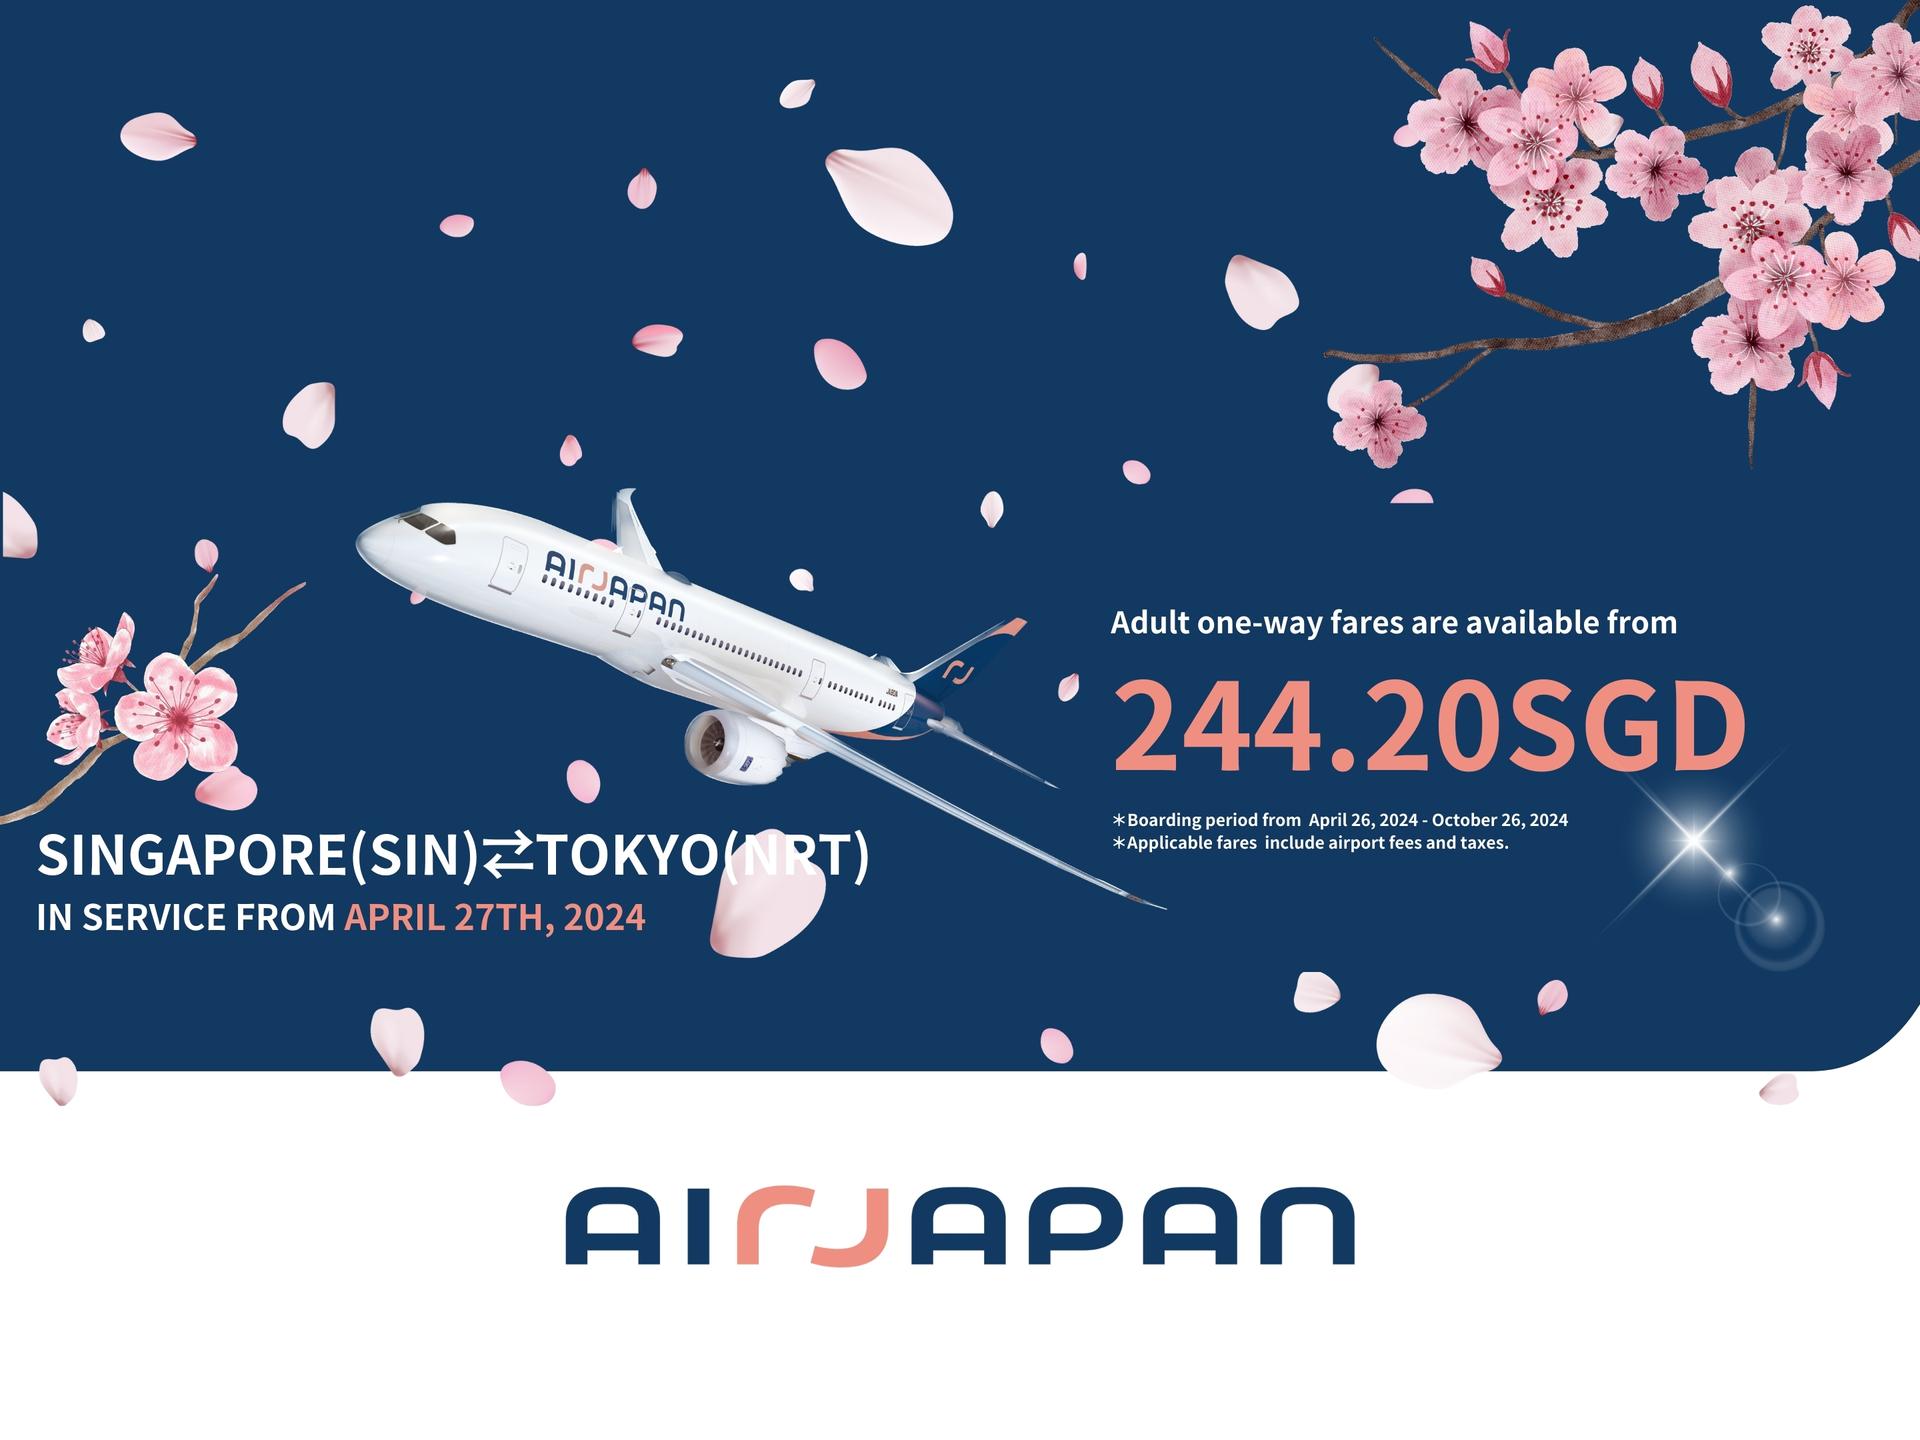 Singapore ⇔ Tokyo(Narita) adult one-way fares are from 244.20SGD!